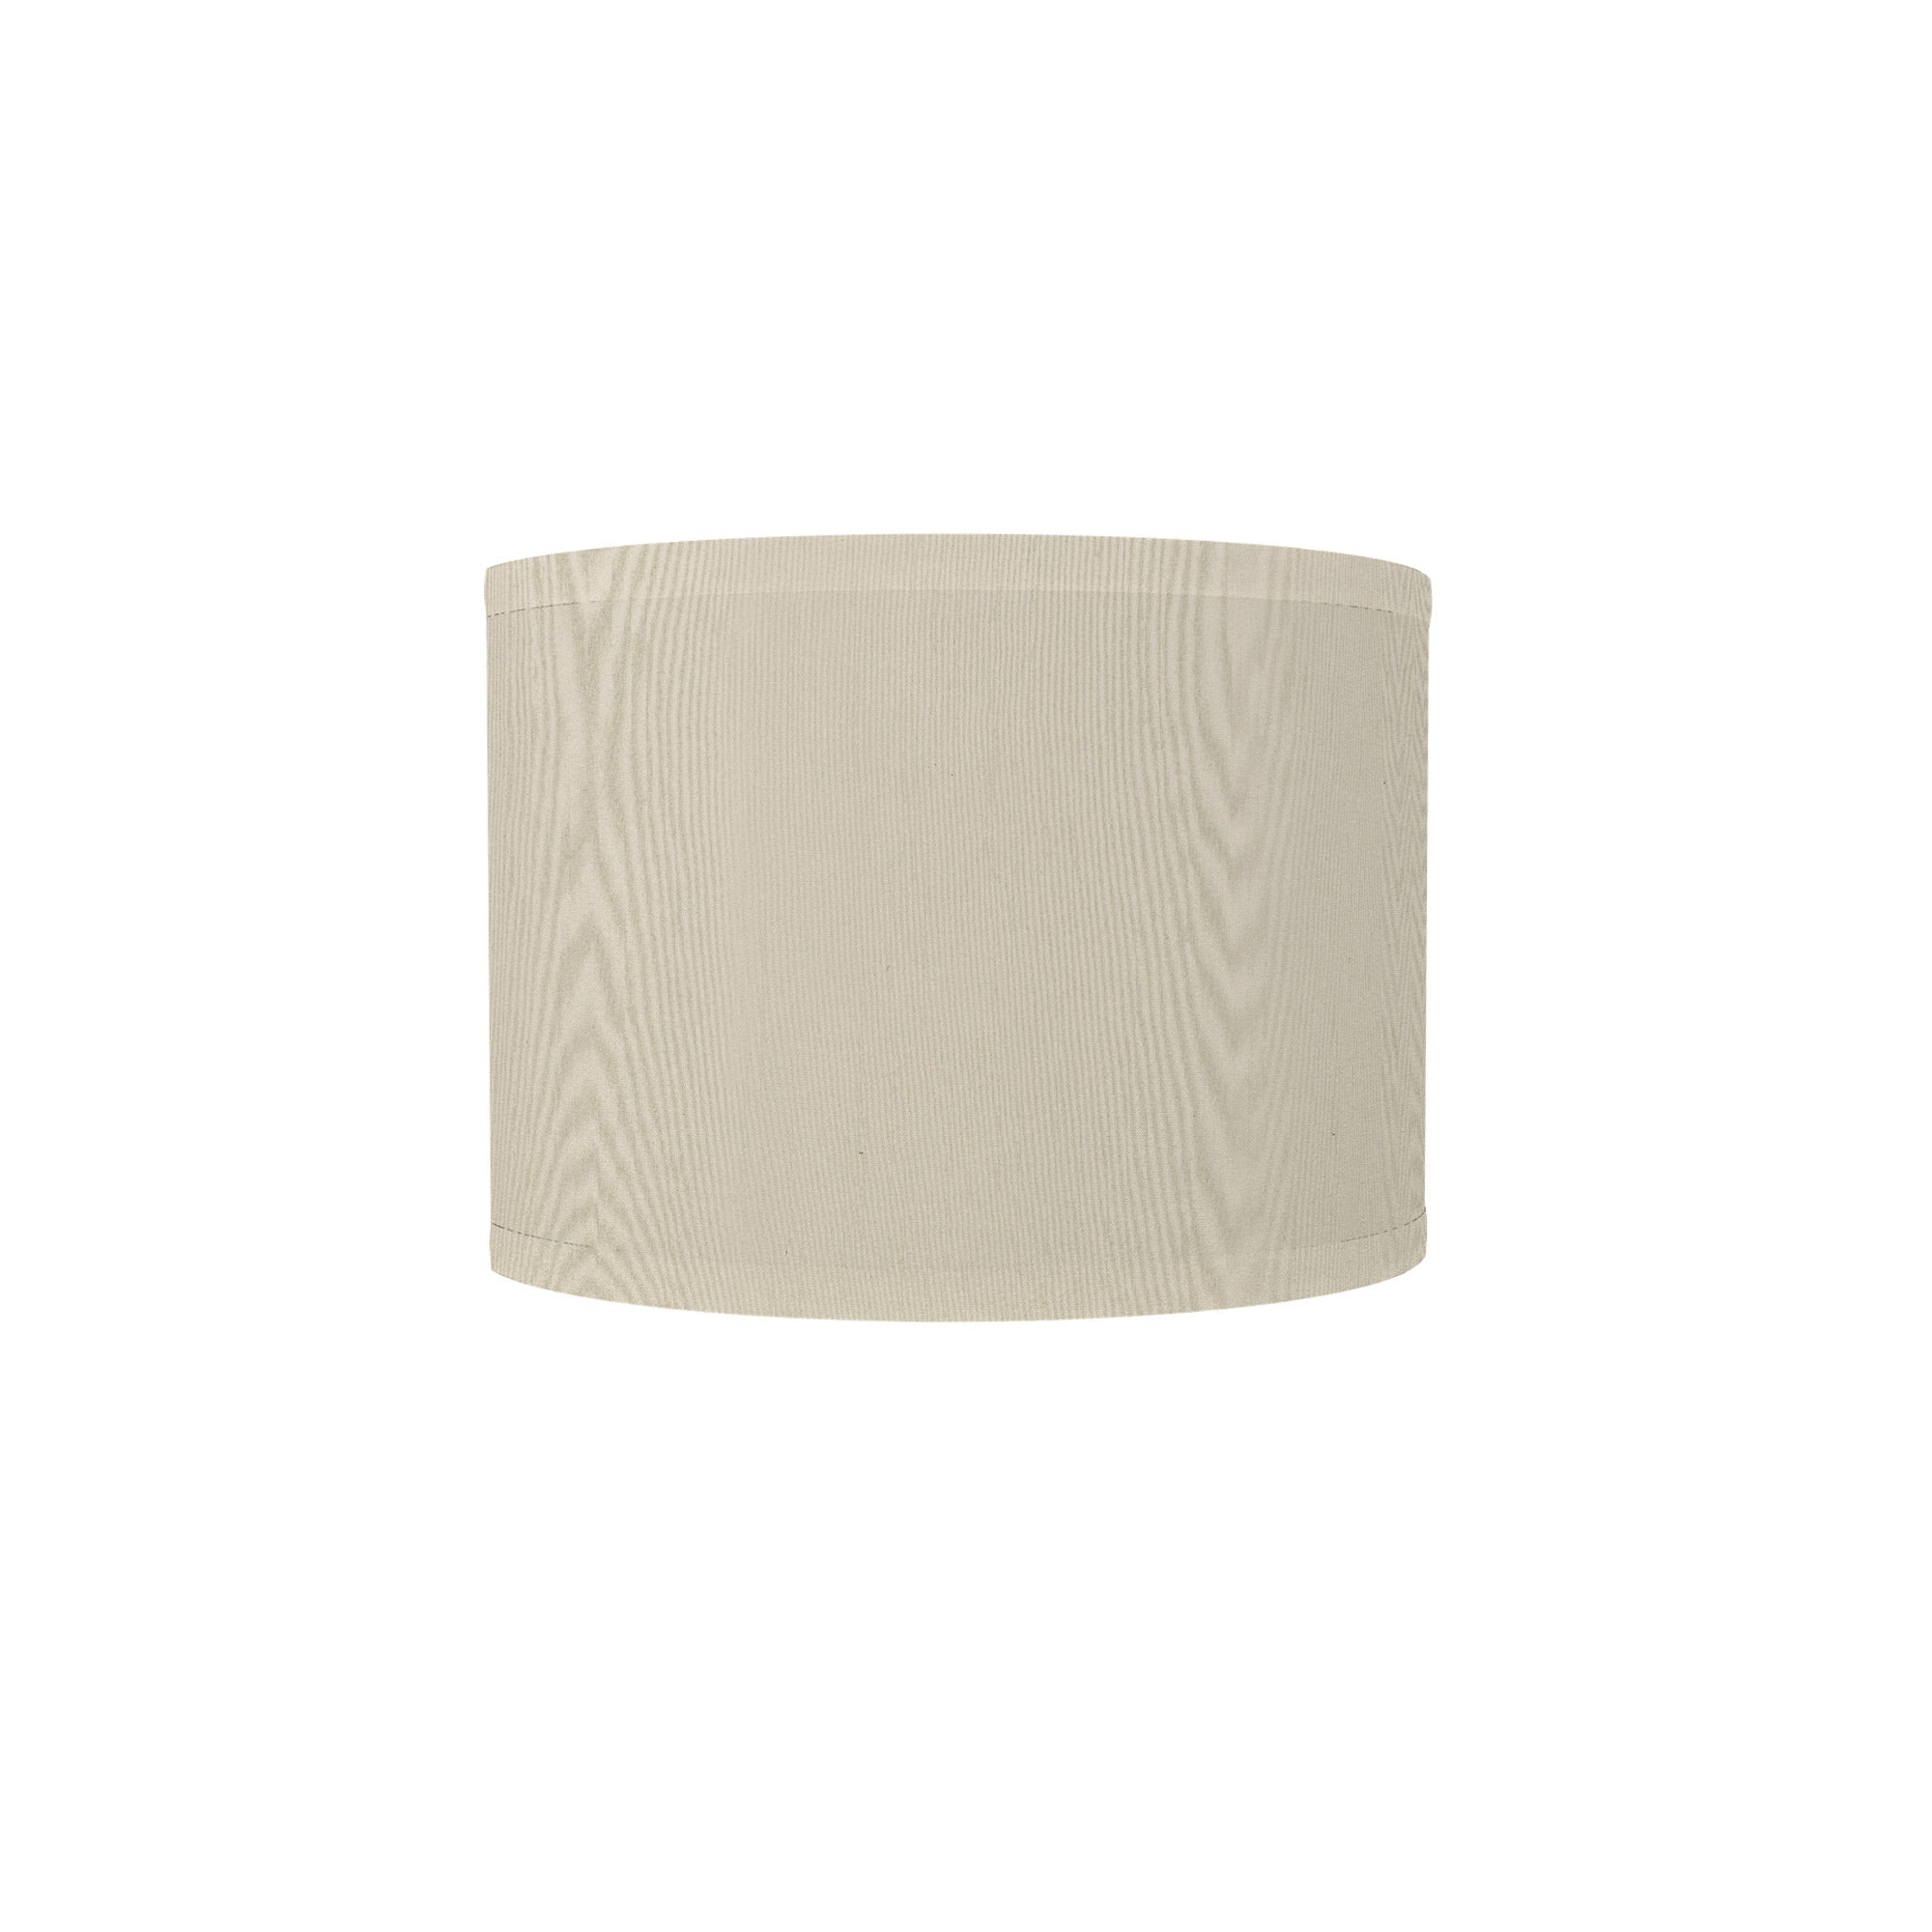 The Bryce Wall Sconce from Seascape Fixtures with a silk shade in cream color.